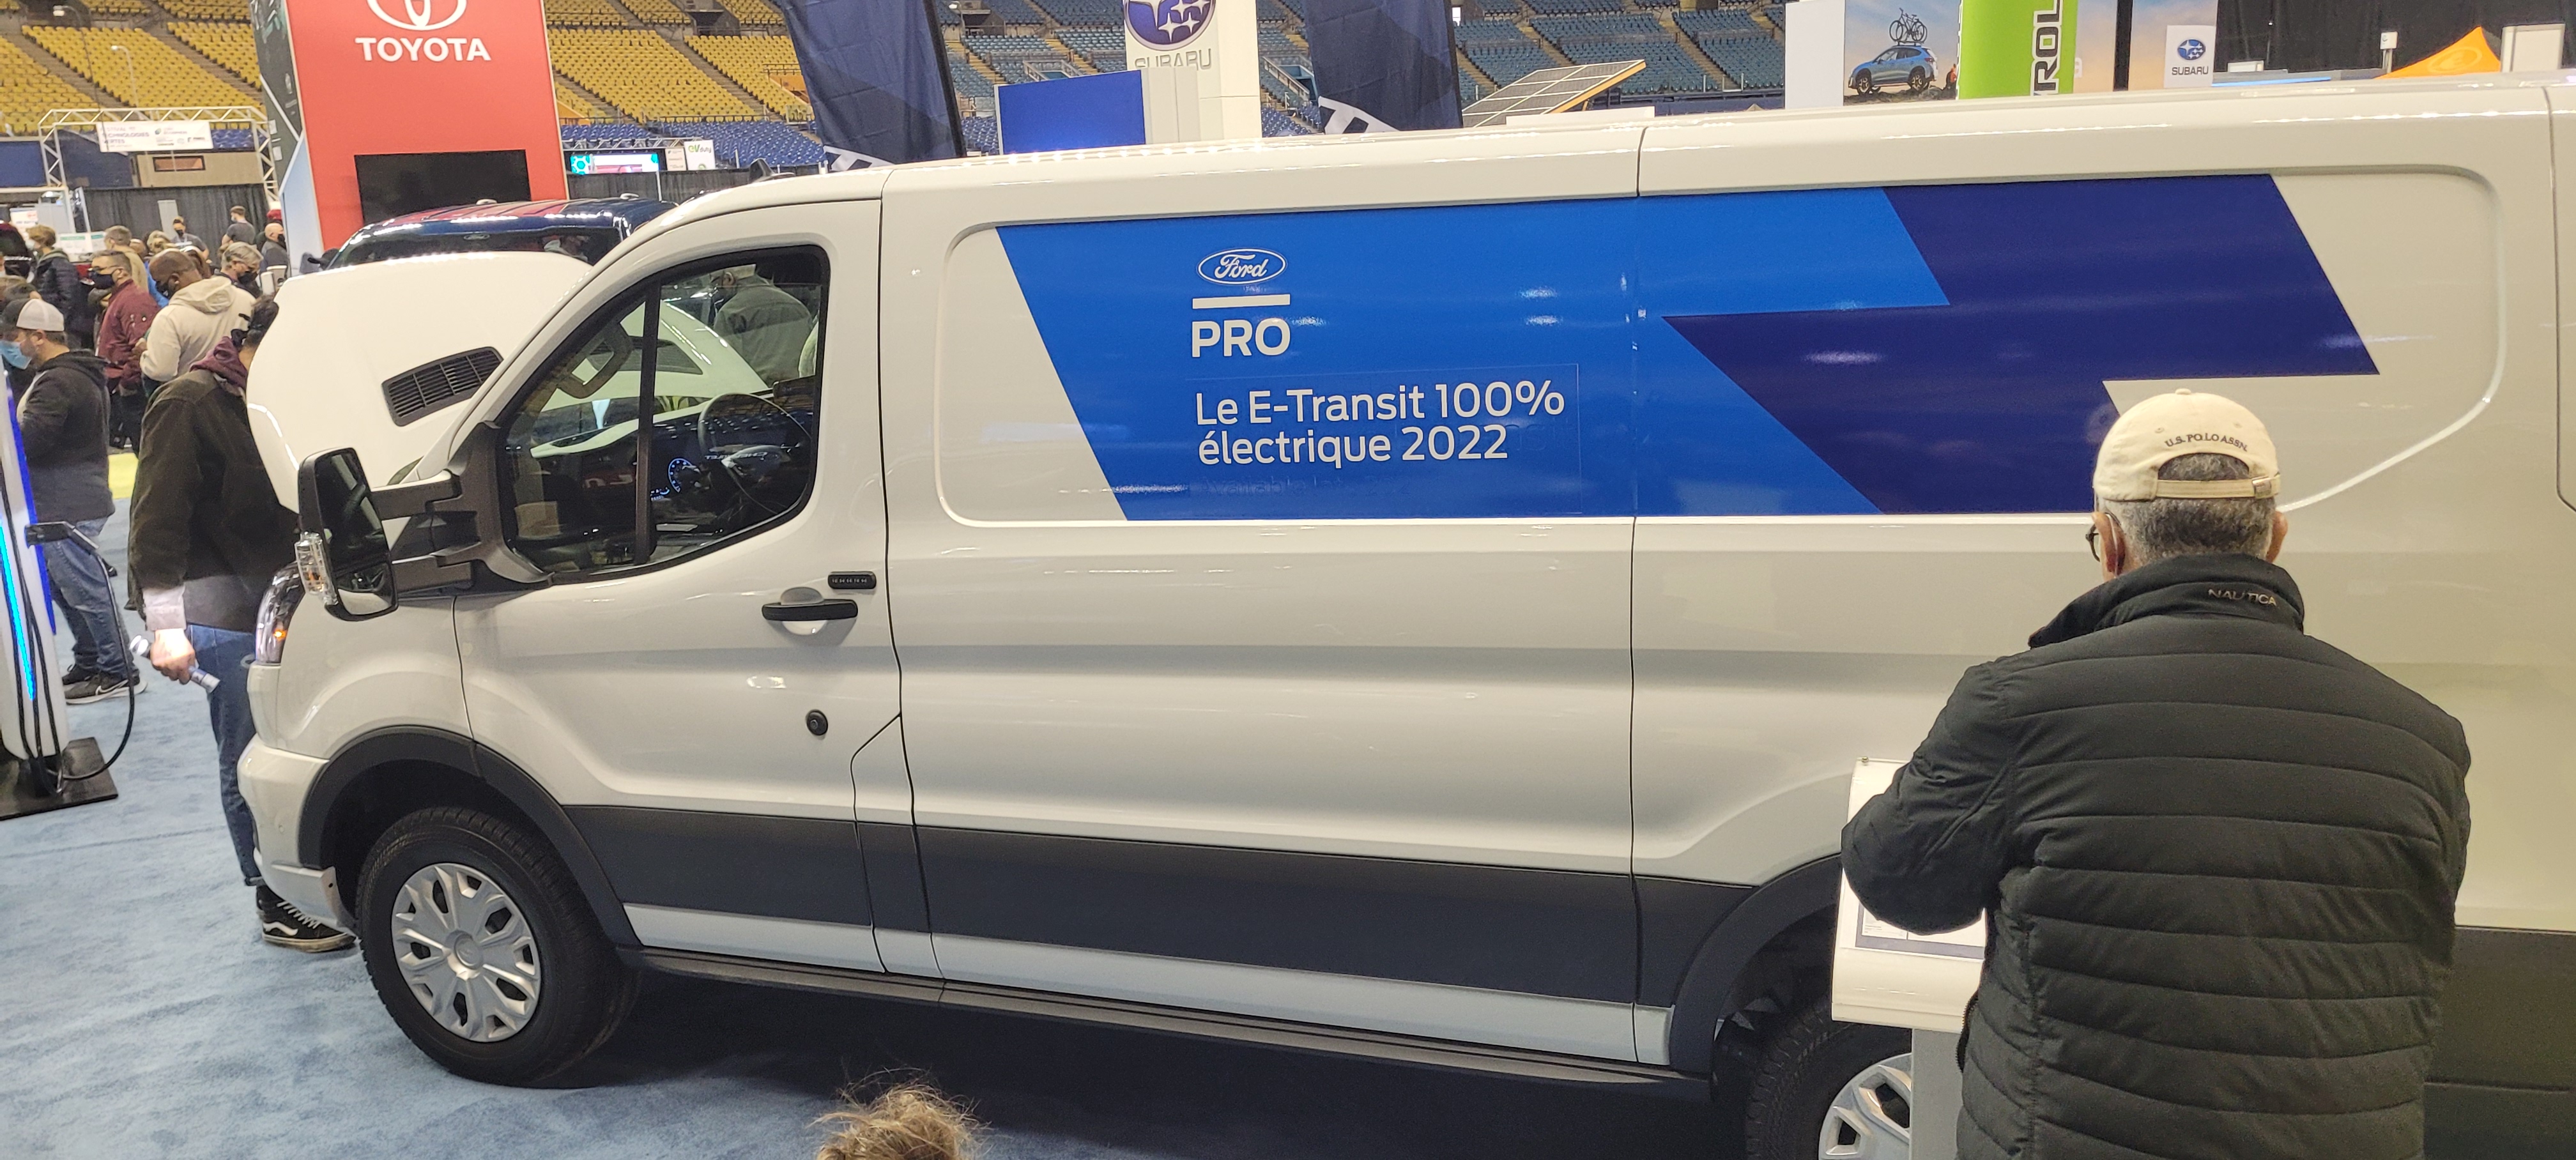 2022 Montreal Electric Vehicle Show: Ford E-Transit